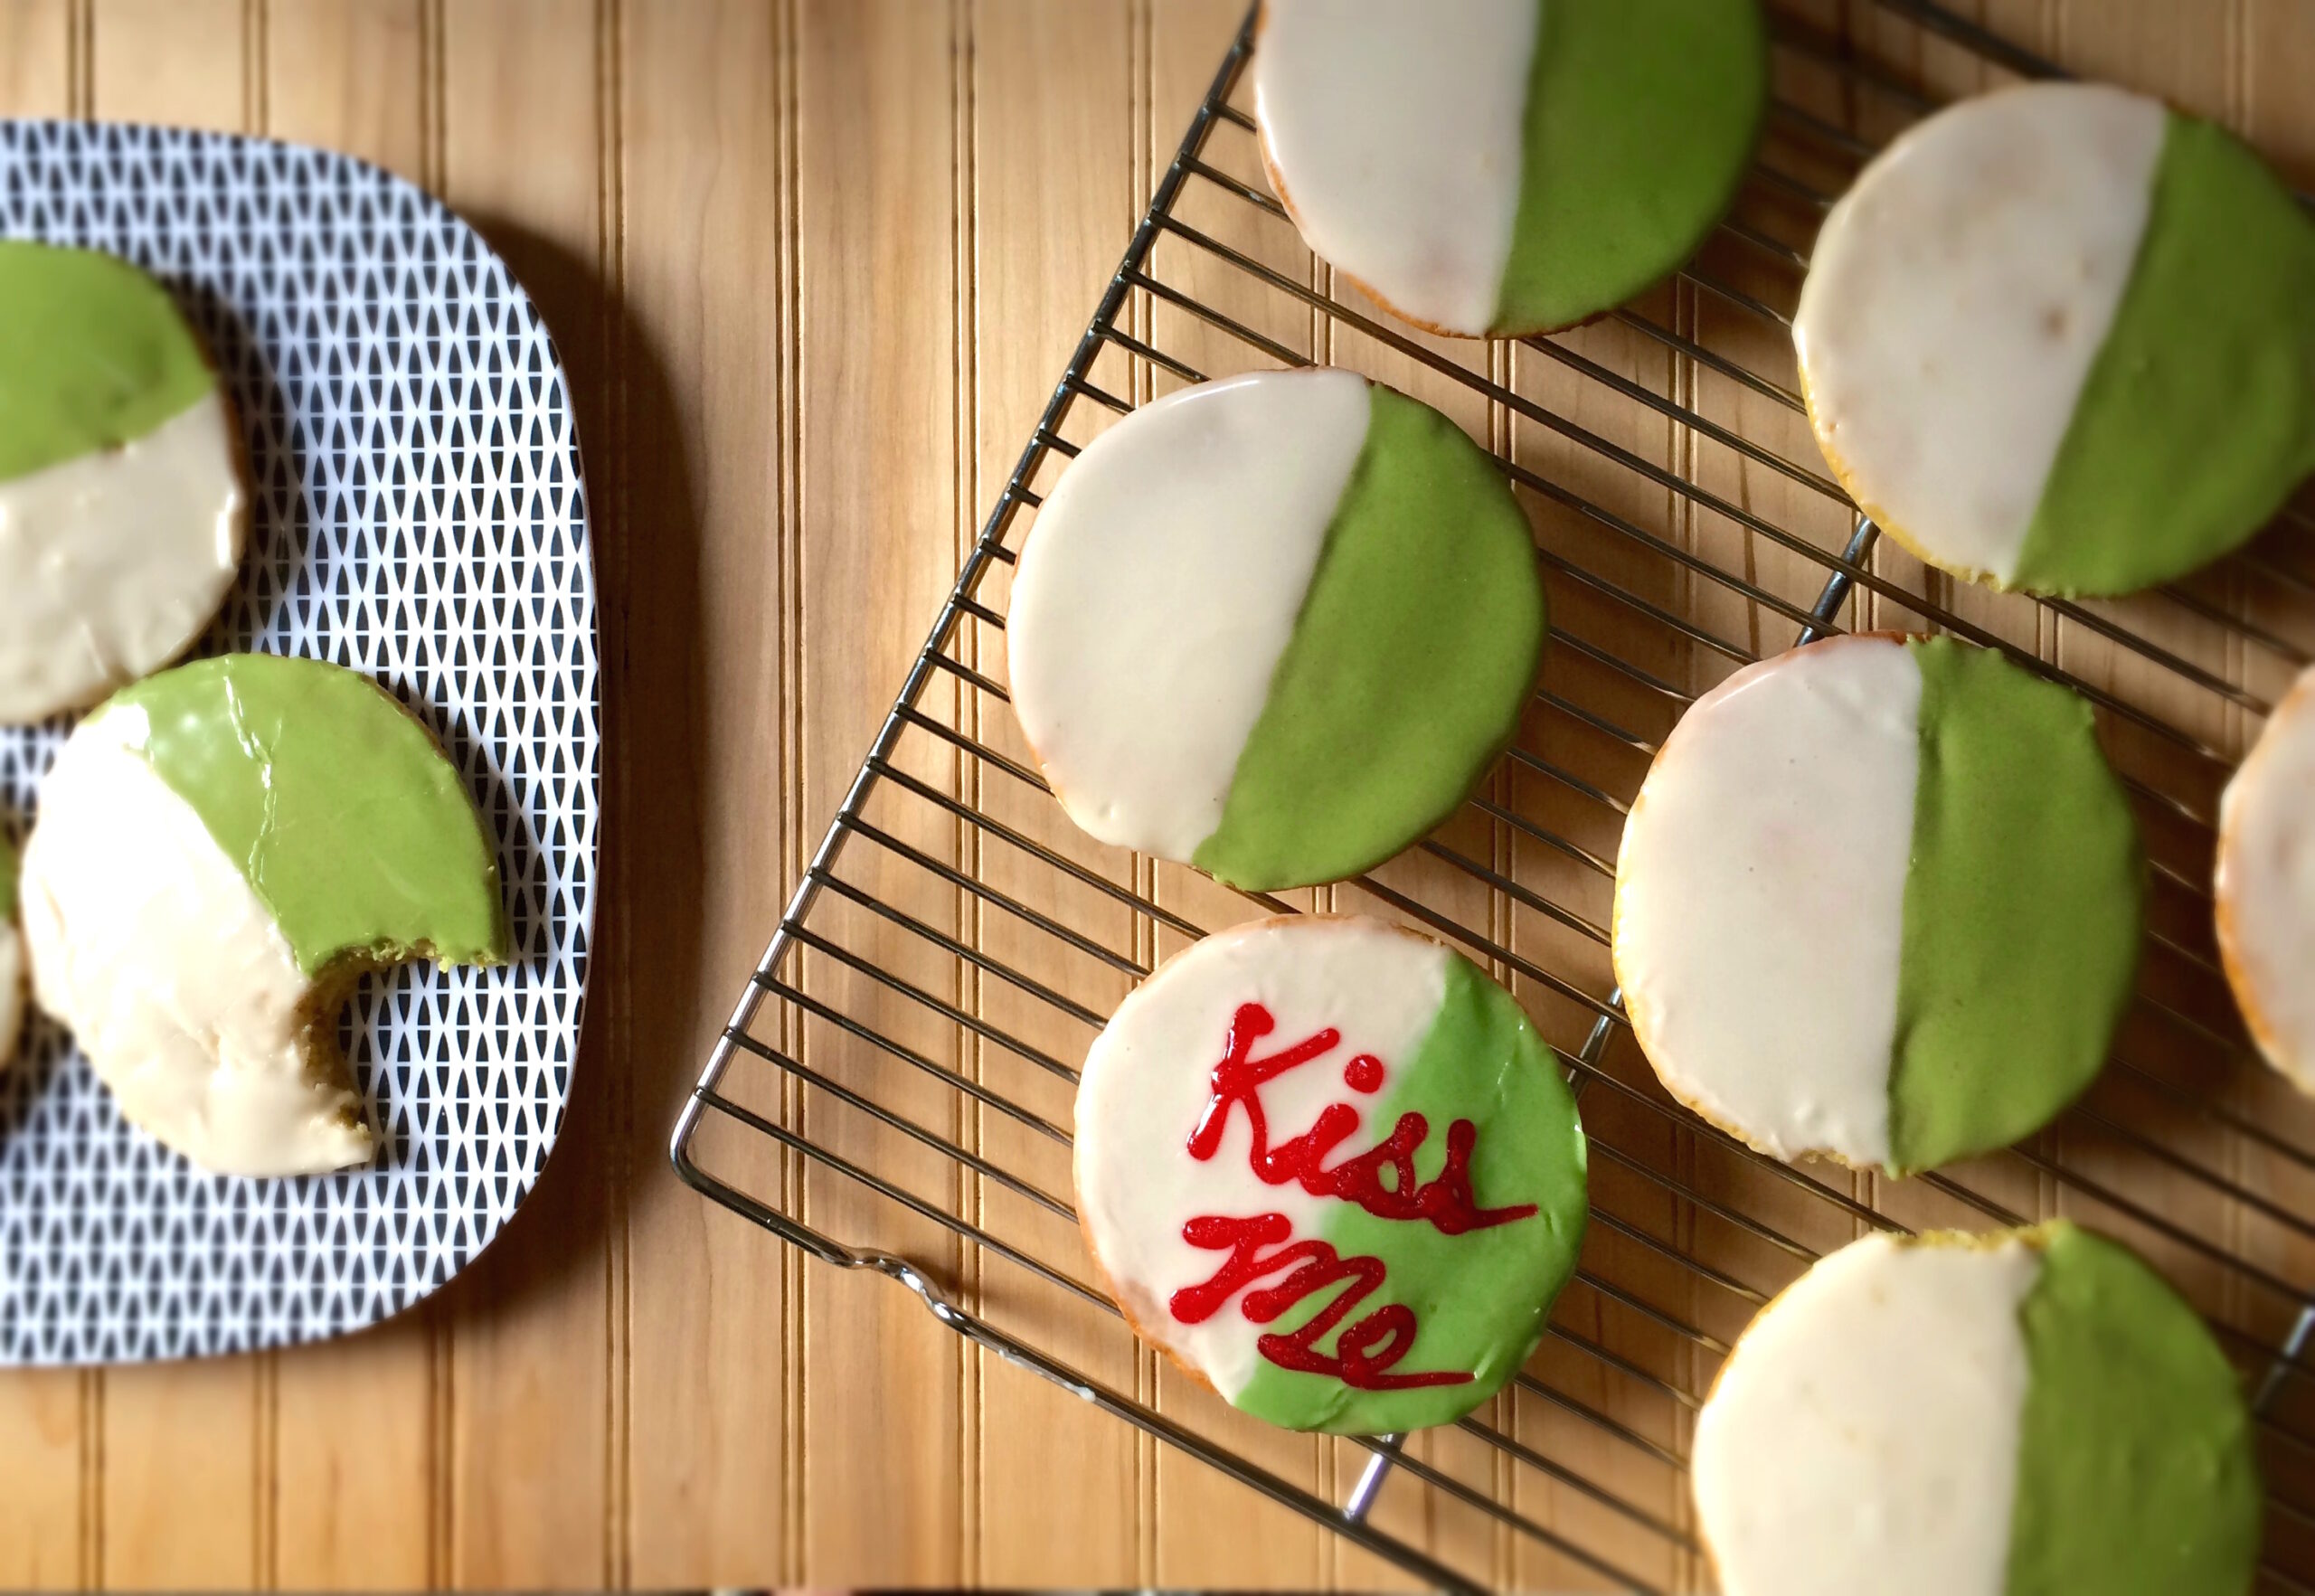 Green-and-White Cookies